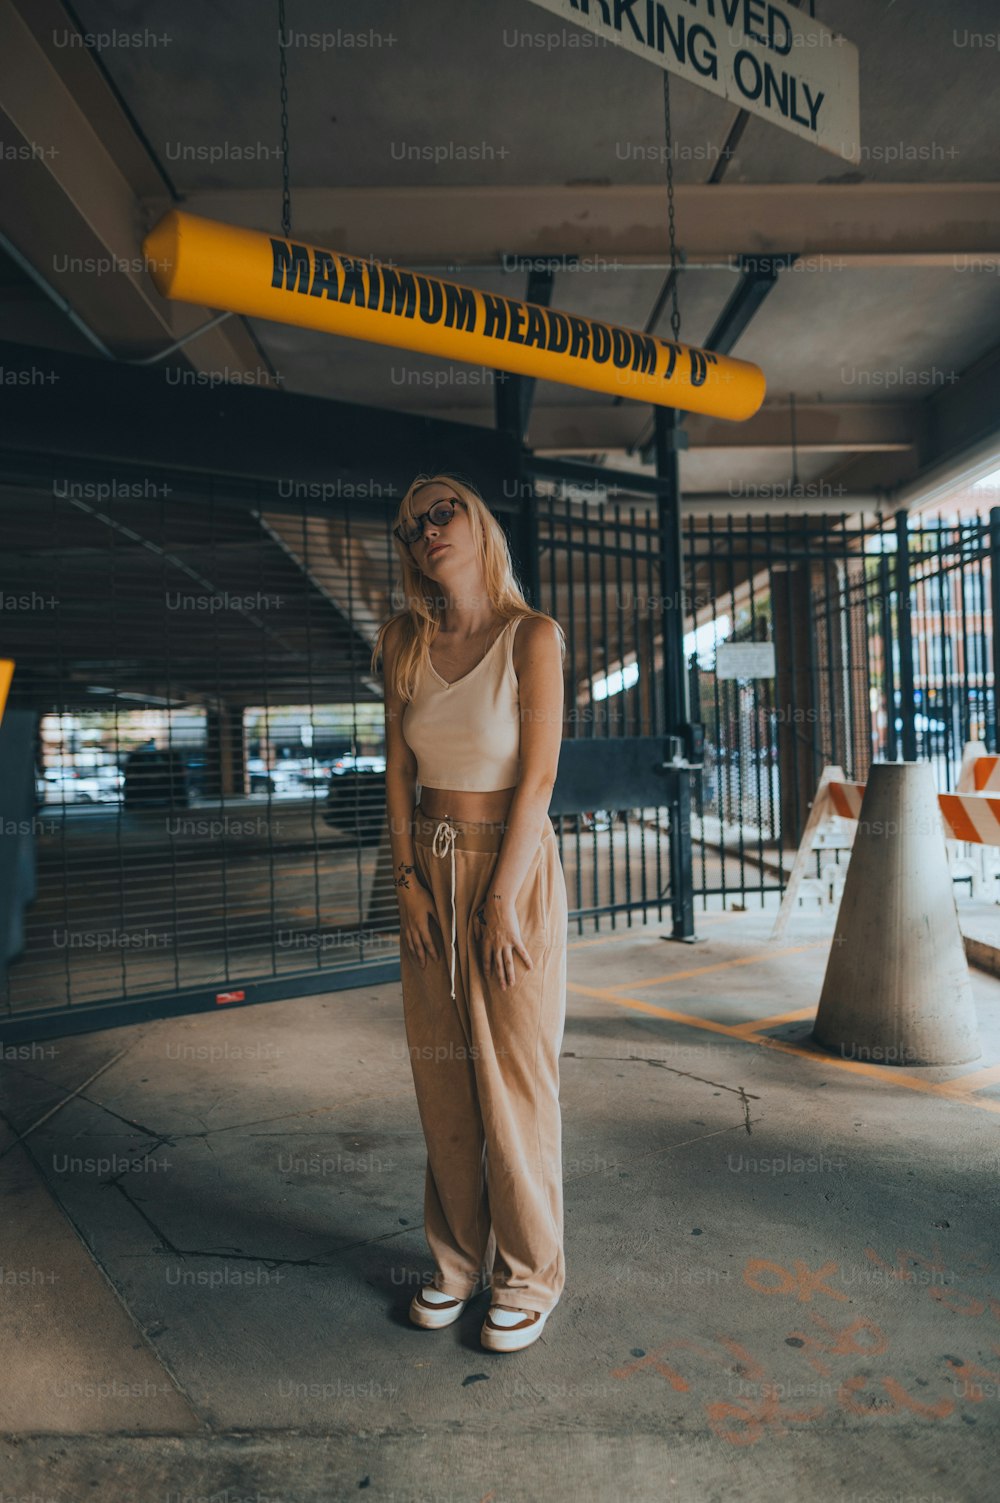 a woman is standing in a parking garage